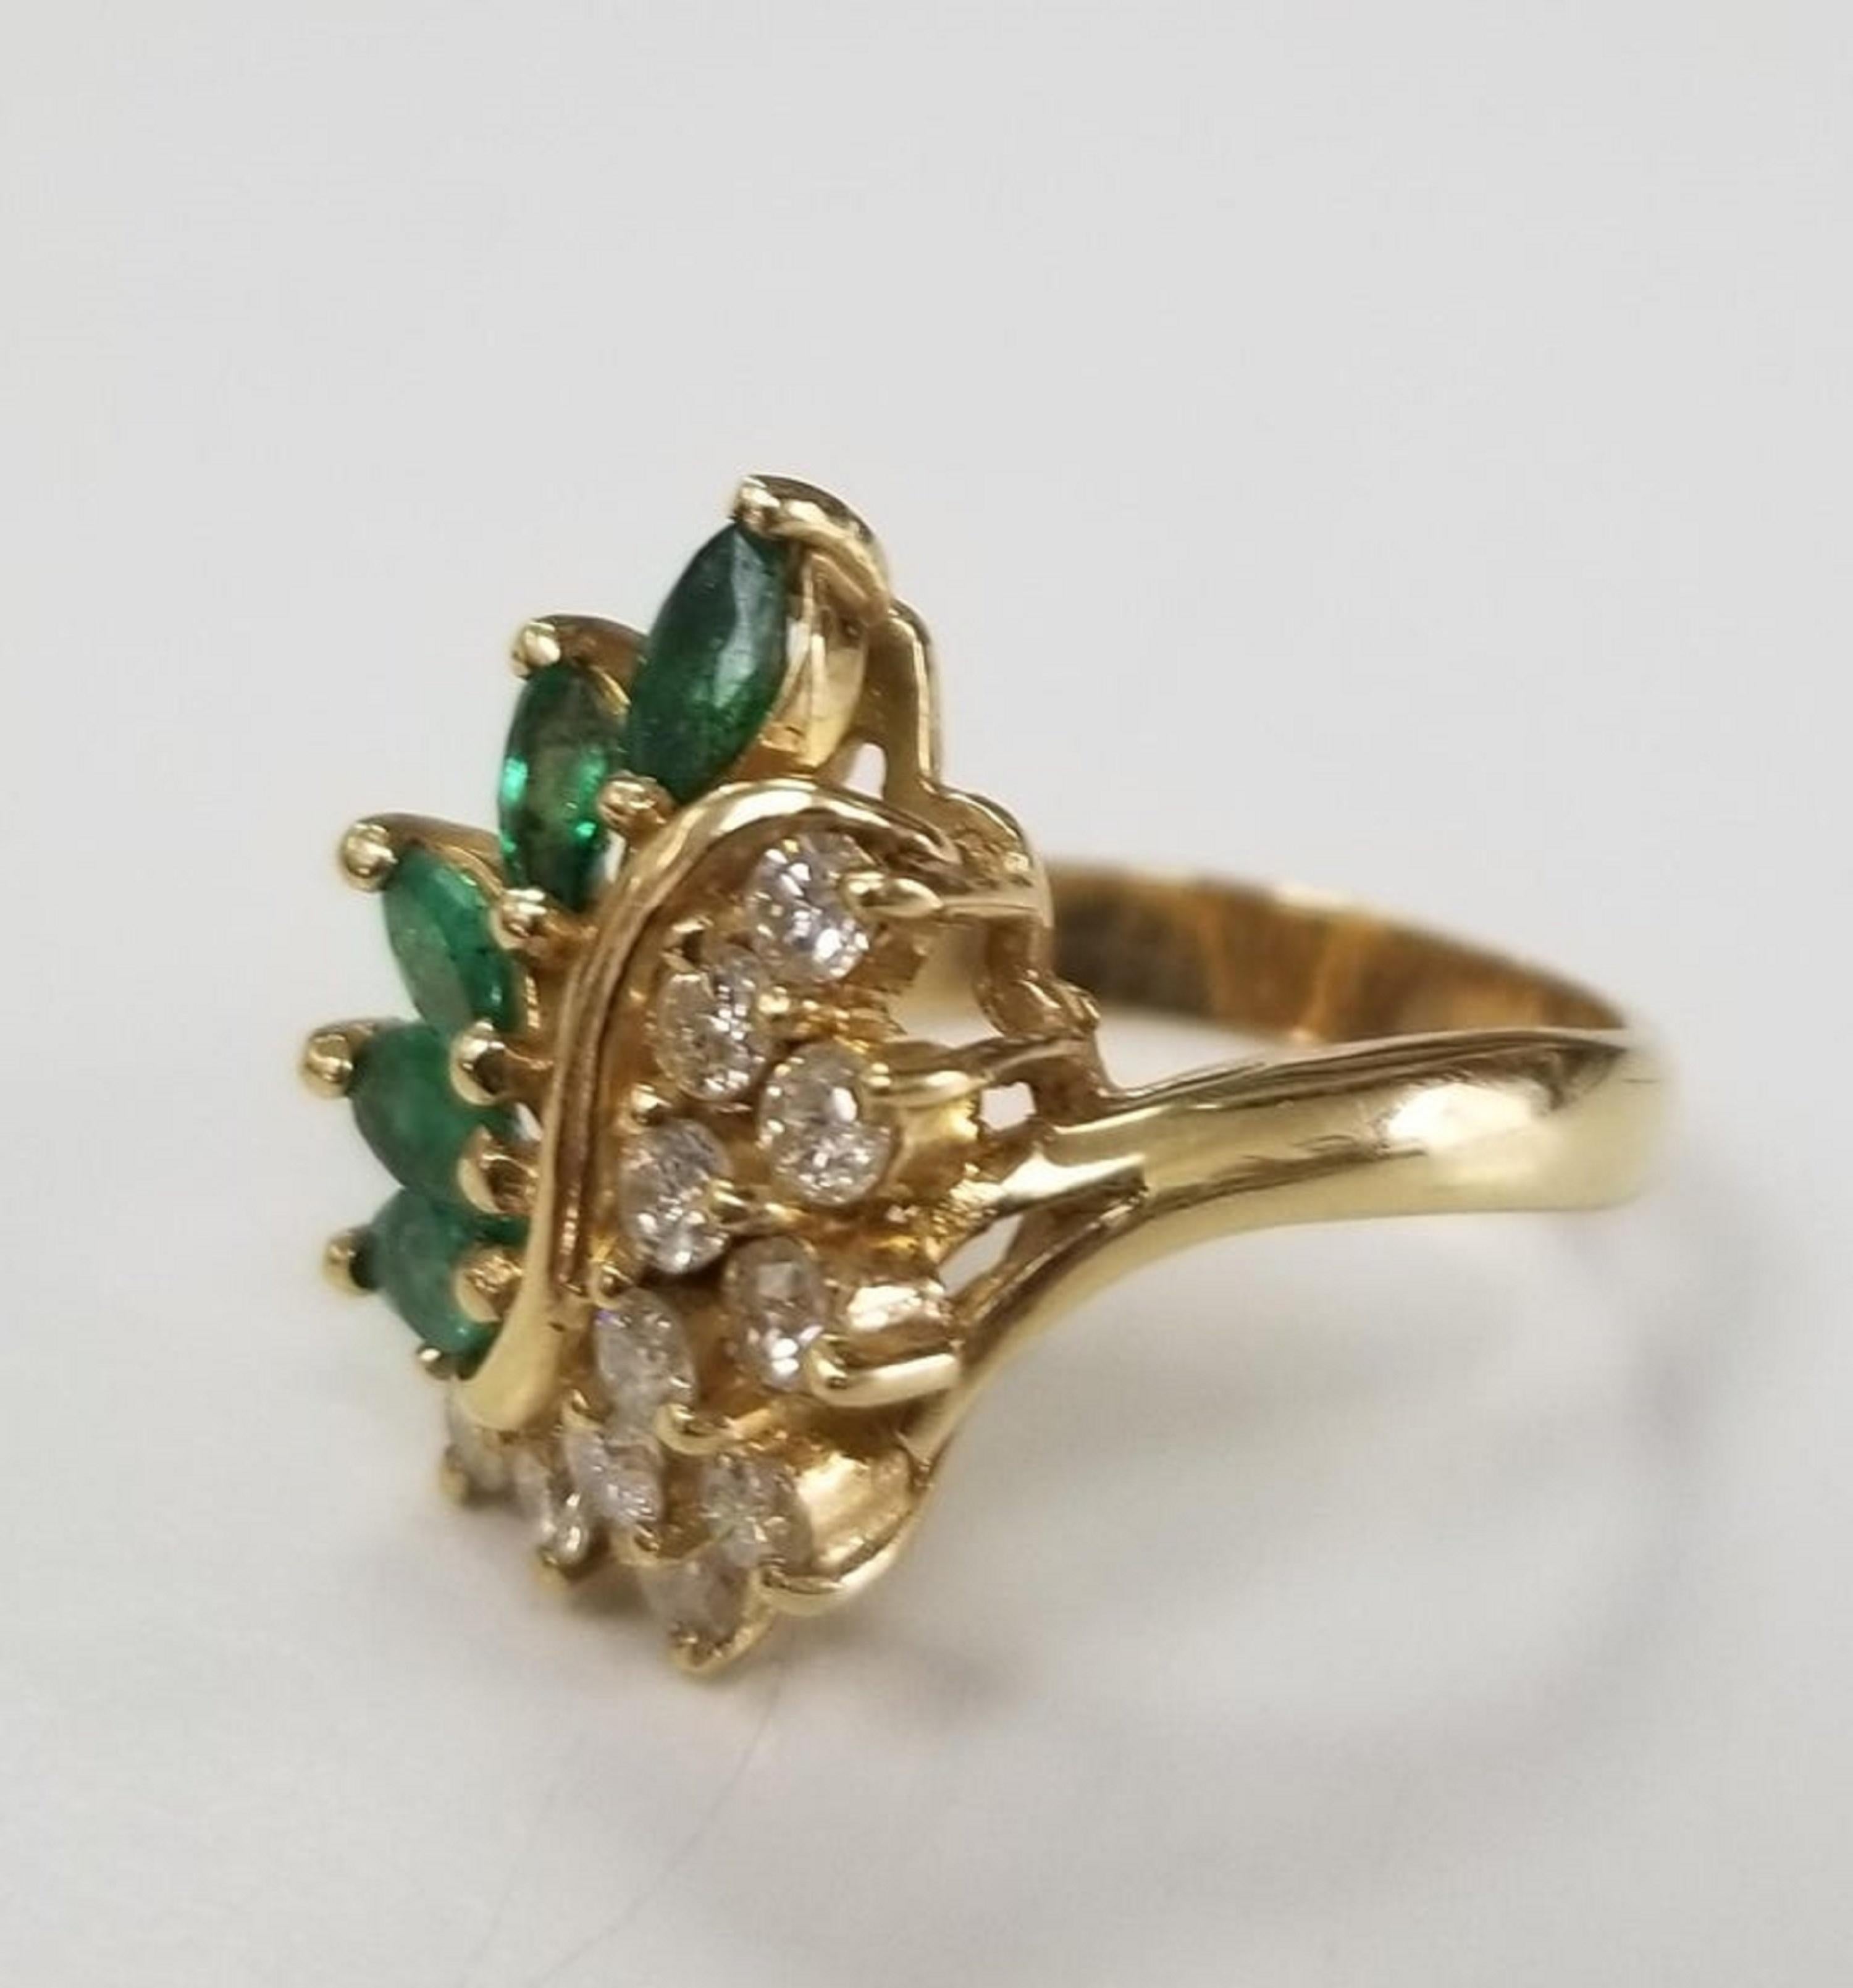 14k yellow gold emerald and diamond ring, containing 11 round  emerald weighing .65pts. and 5 marquise cut emeralds weighing .65pts.  This ring is a size 5.5 but we will size to fit for free.